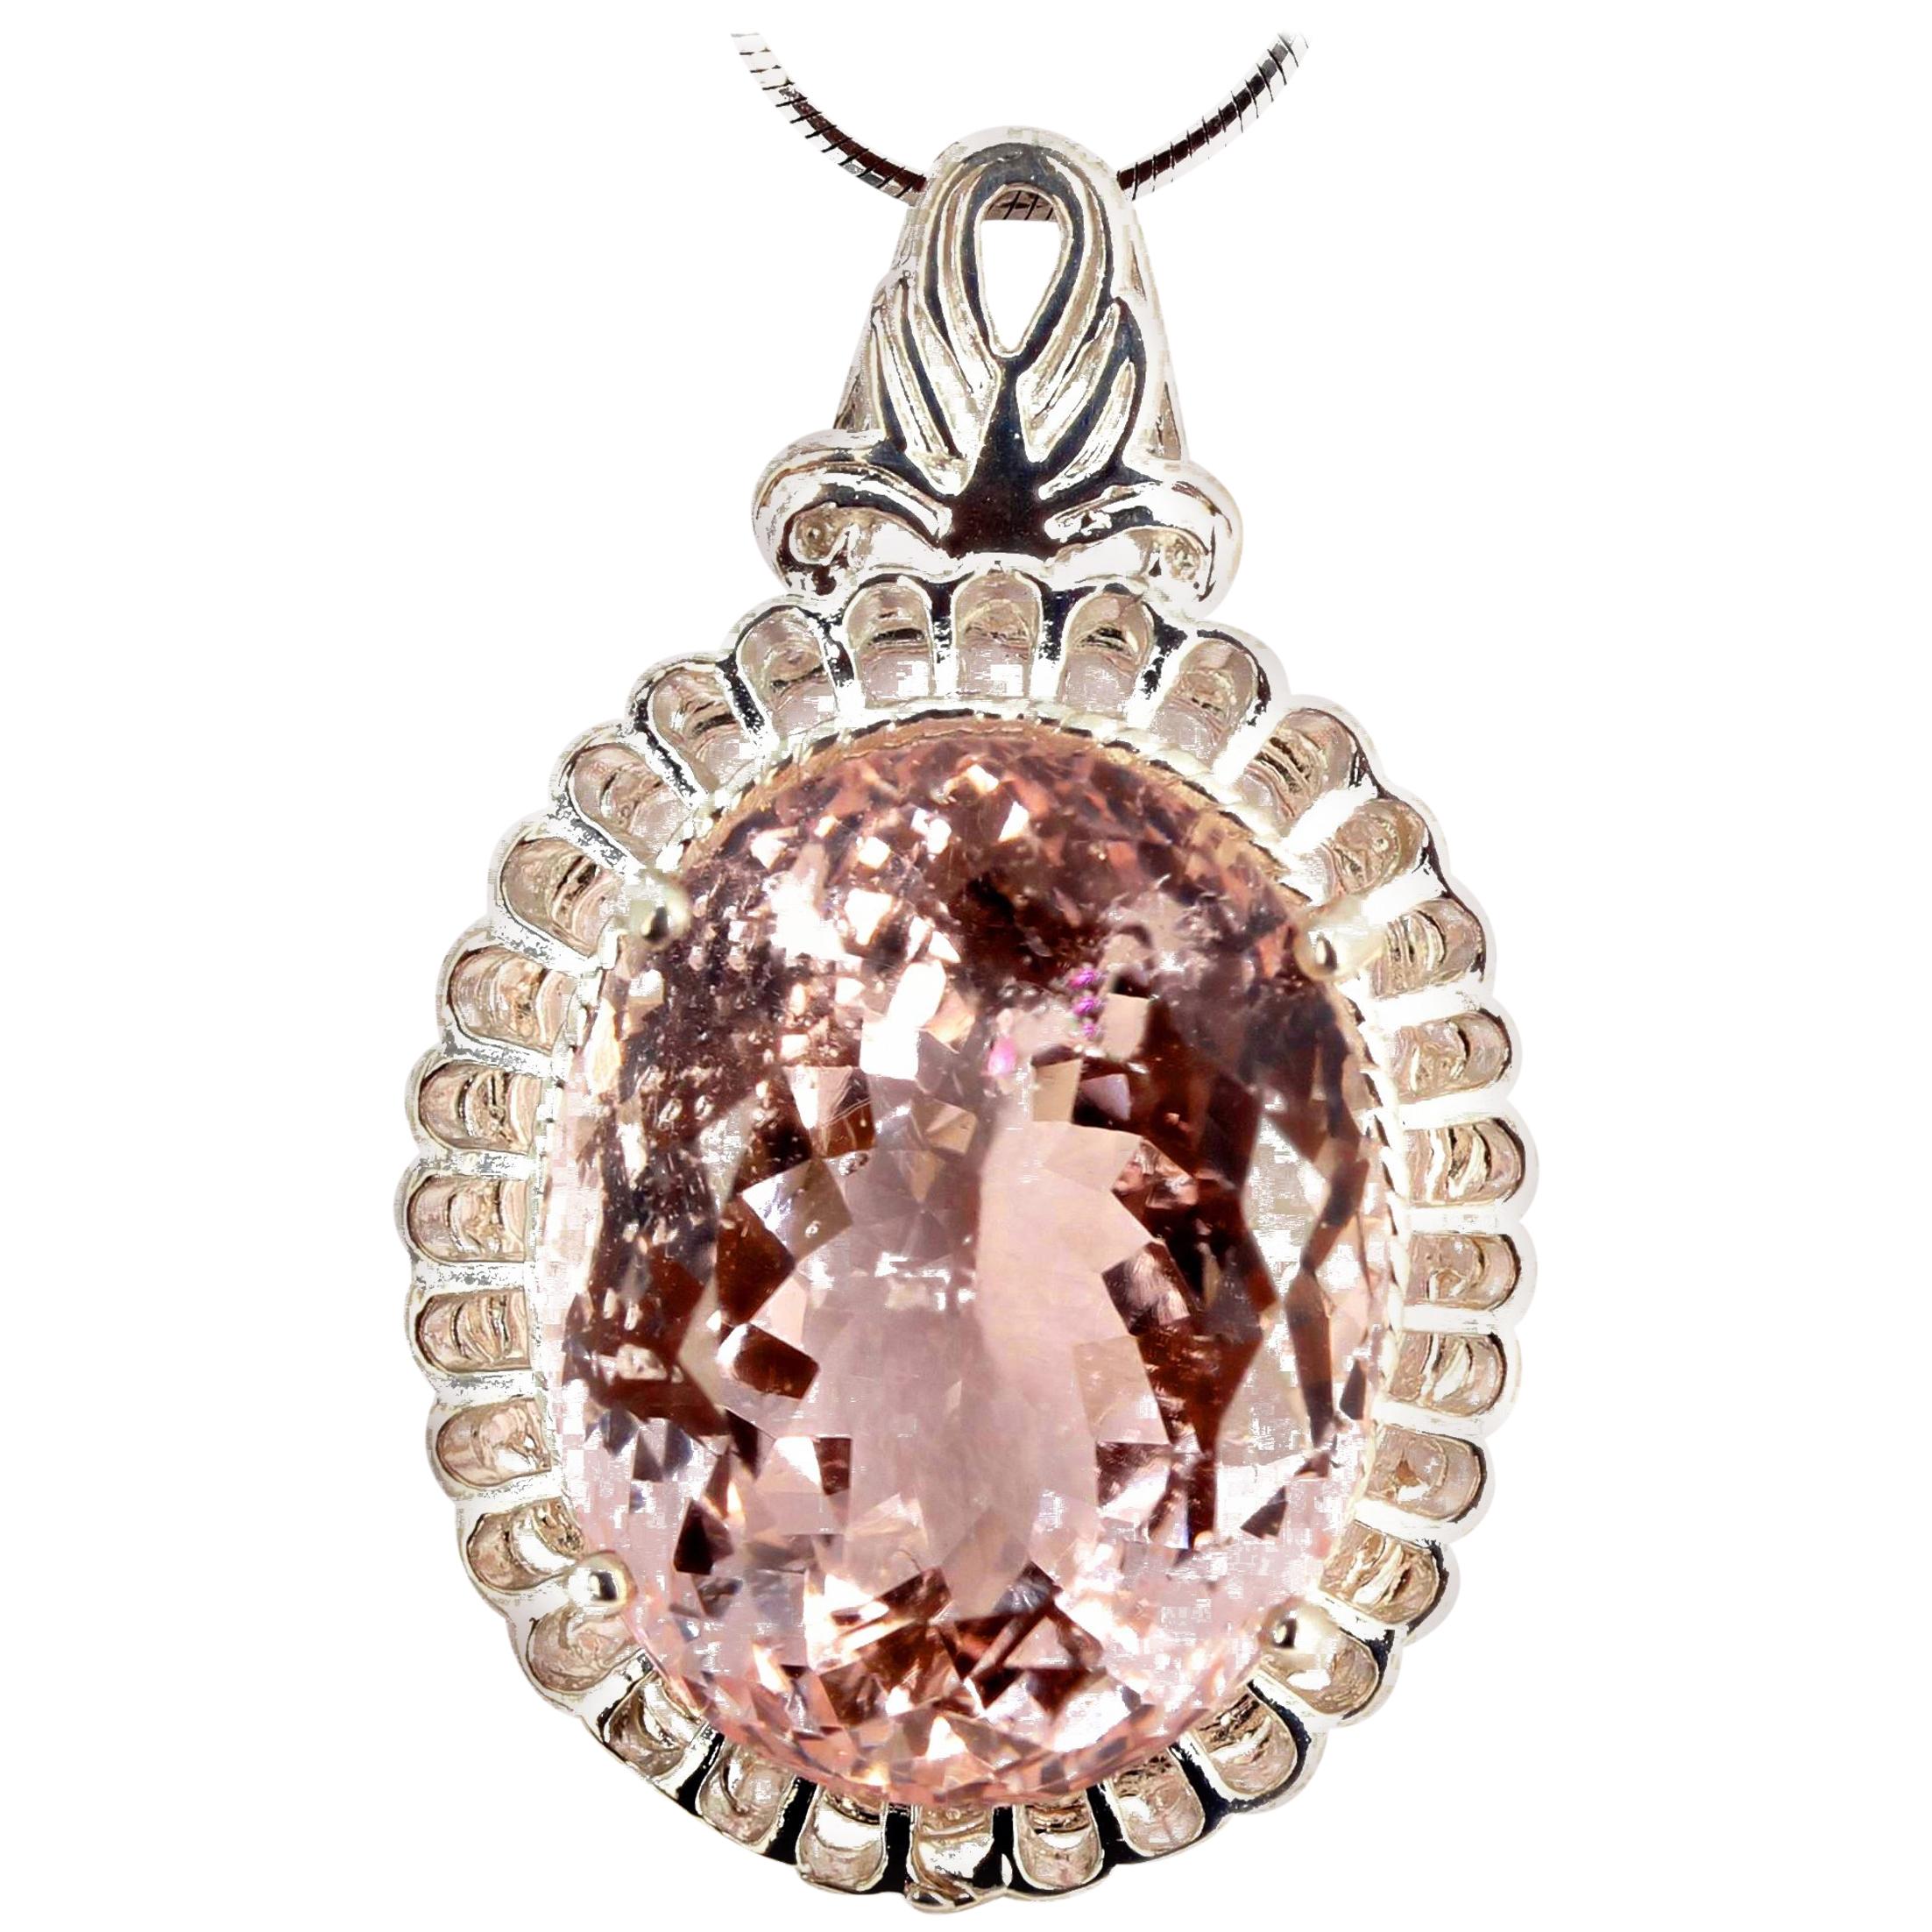 AJD Unusual Classic Large 29 Cts Morganite Sterling Silver Pendant For Sale